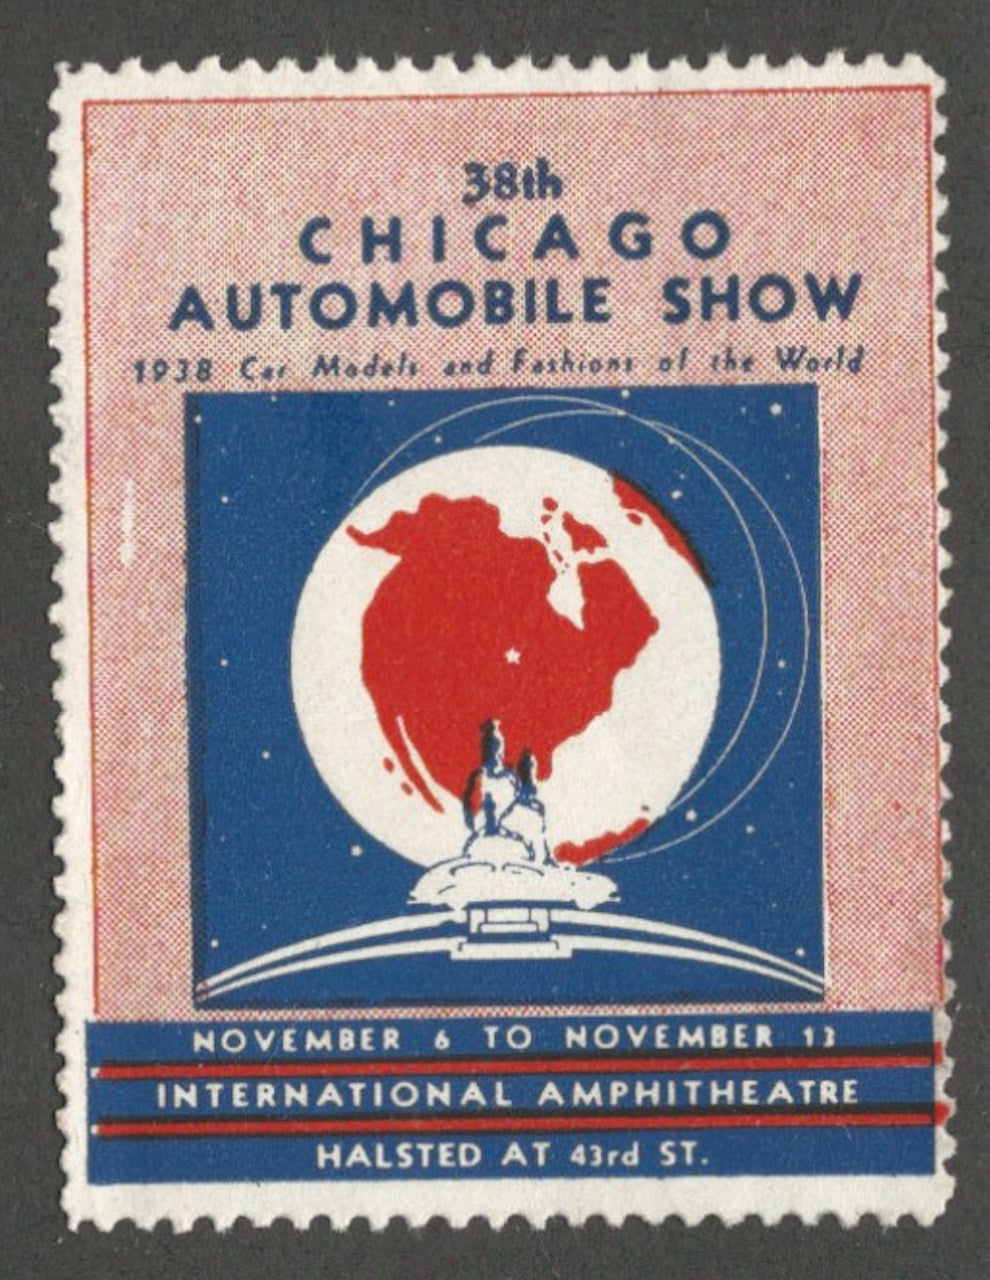 38th Chicago Automobile Show, Chicago, IL, 1938 Poster Stamp